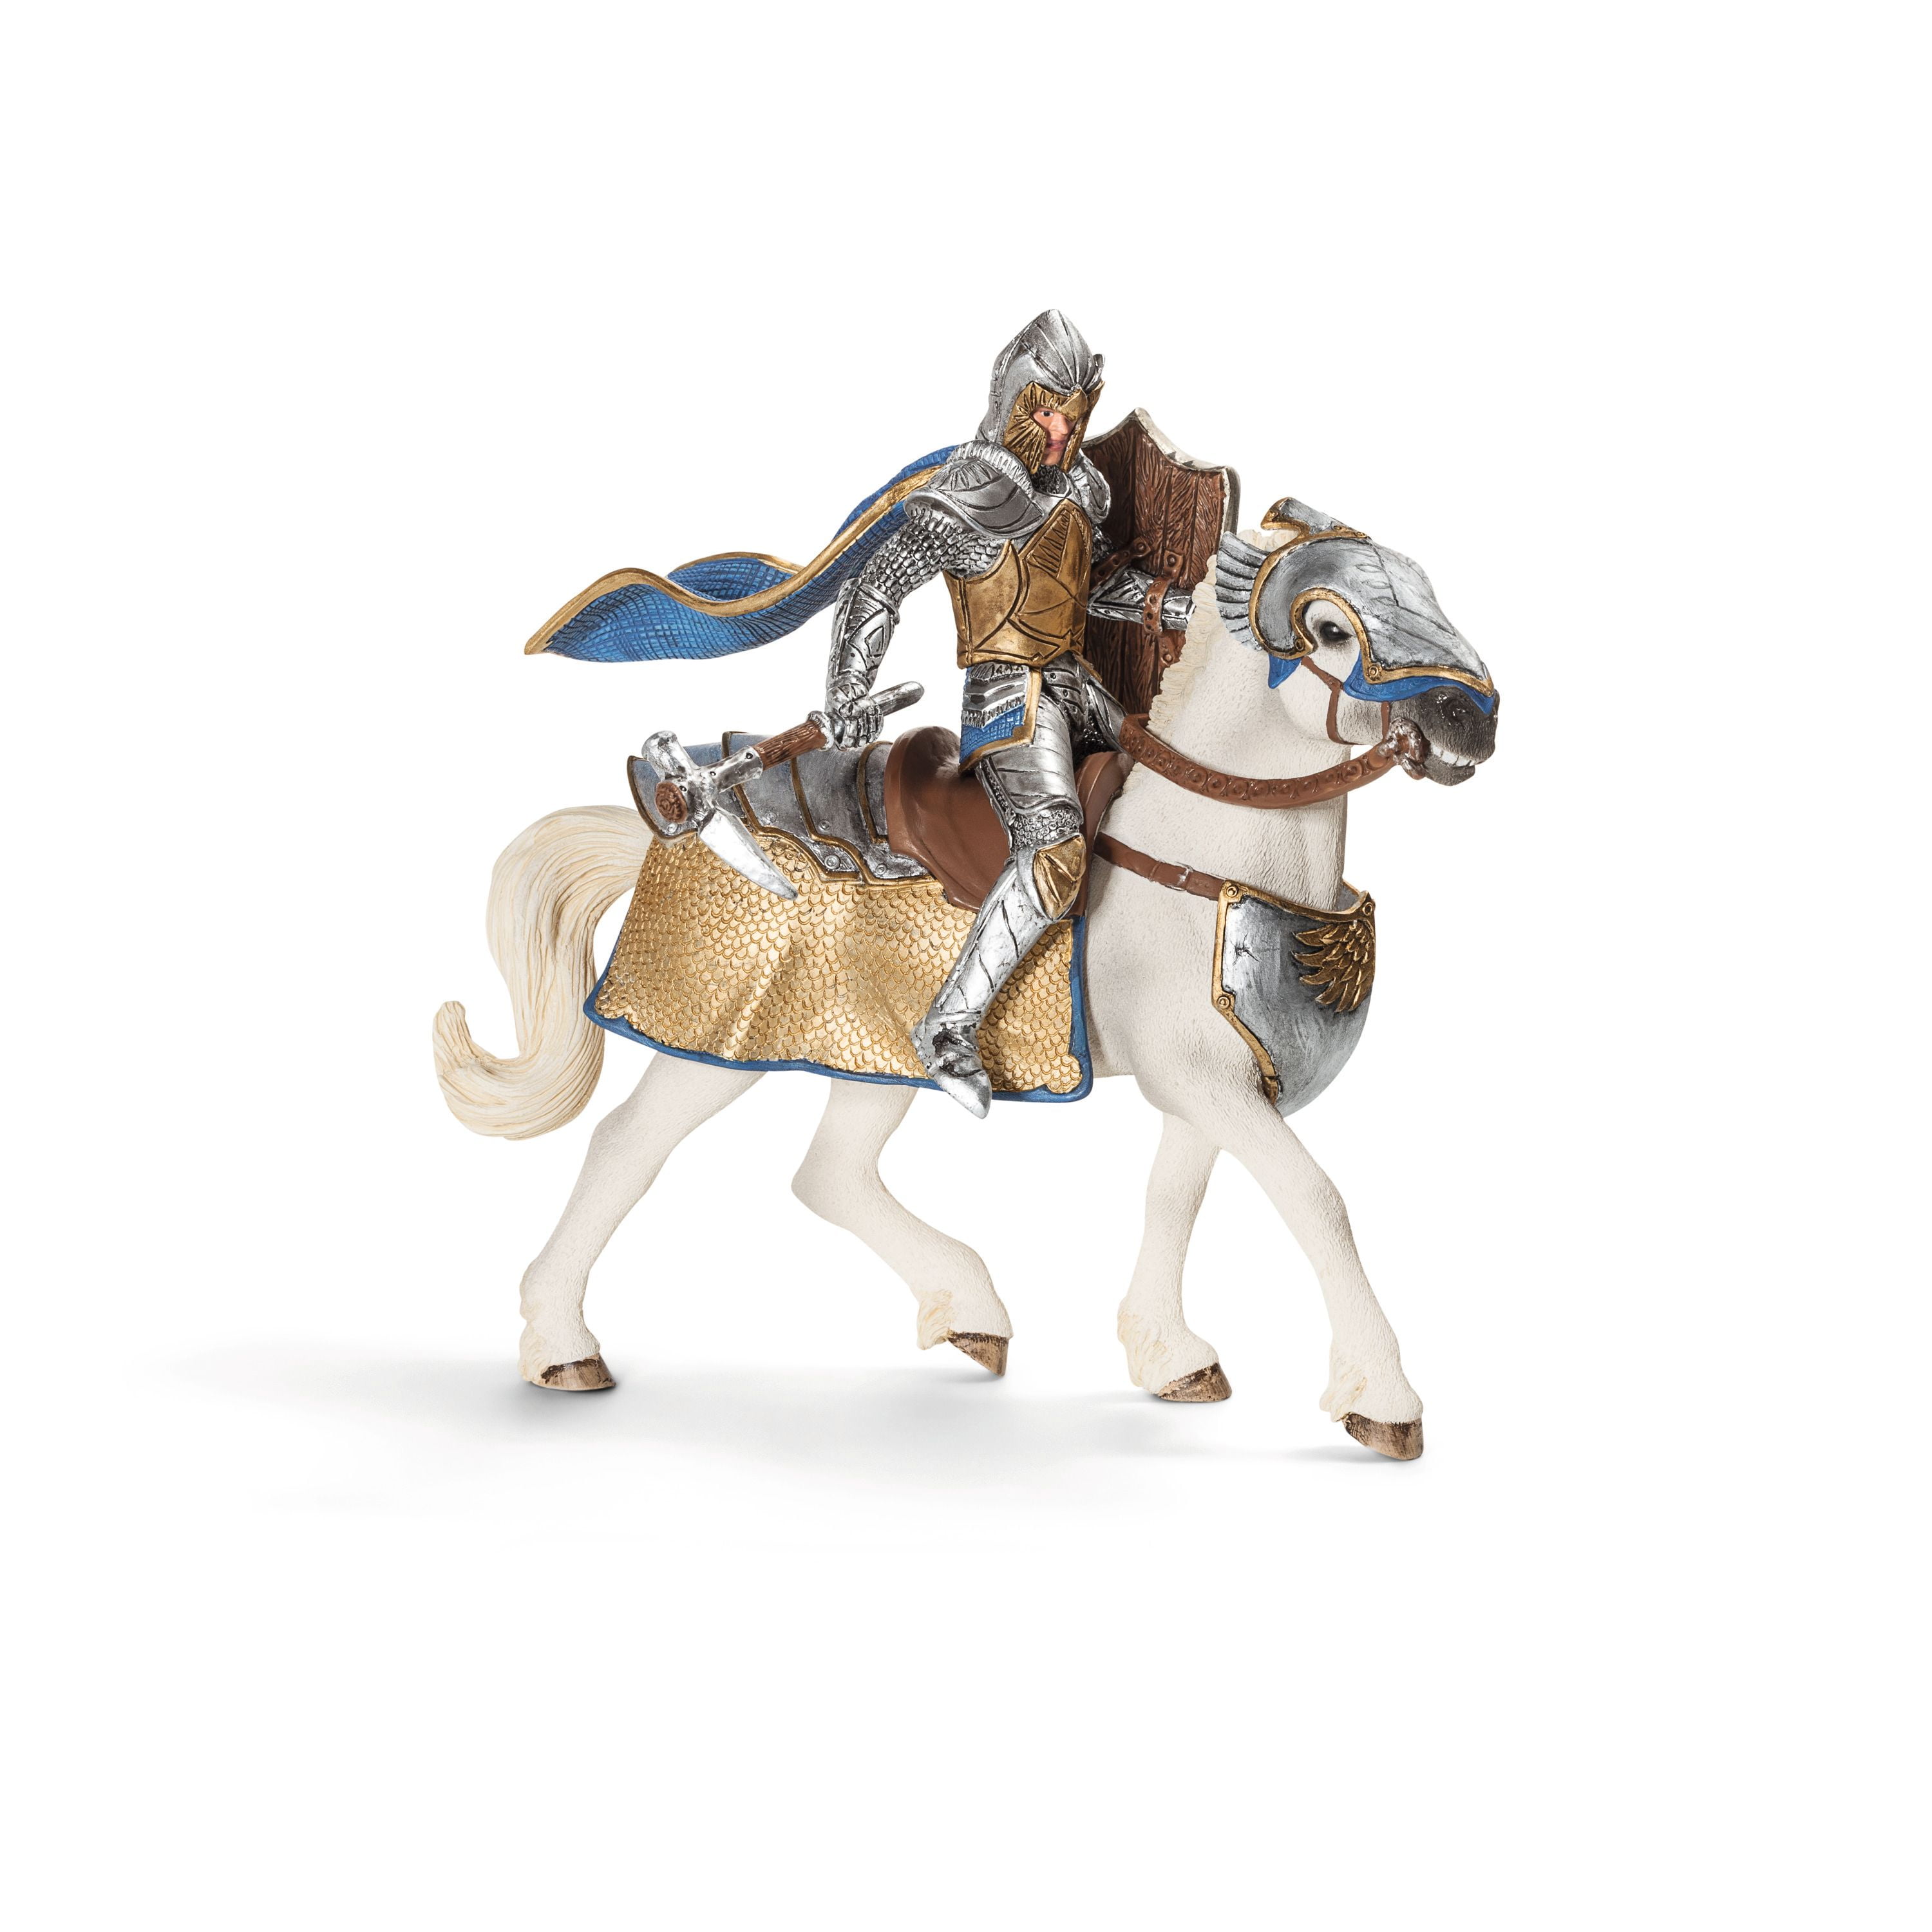 Schleich 70110 Griffin Knight with sword Miniature Figure Toy 